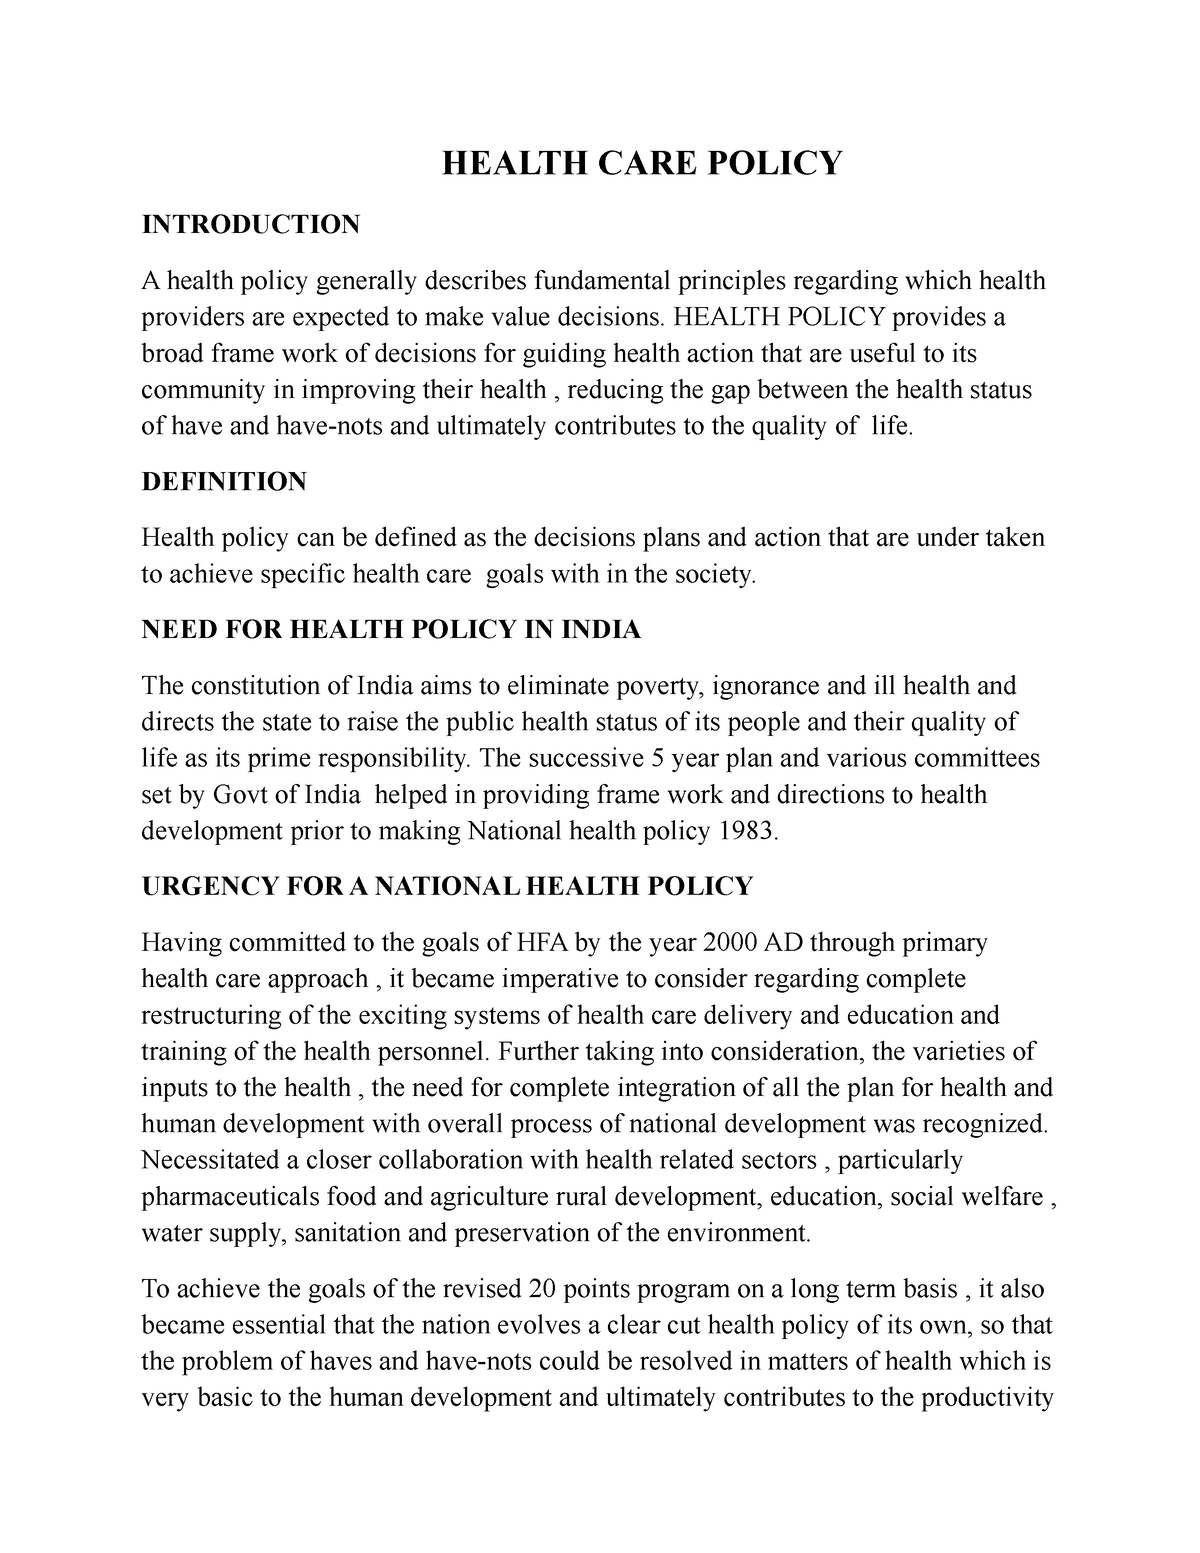 health care policy research paper